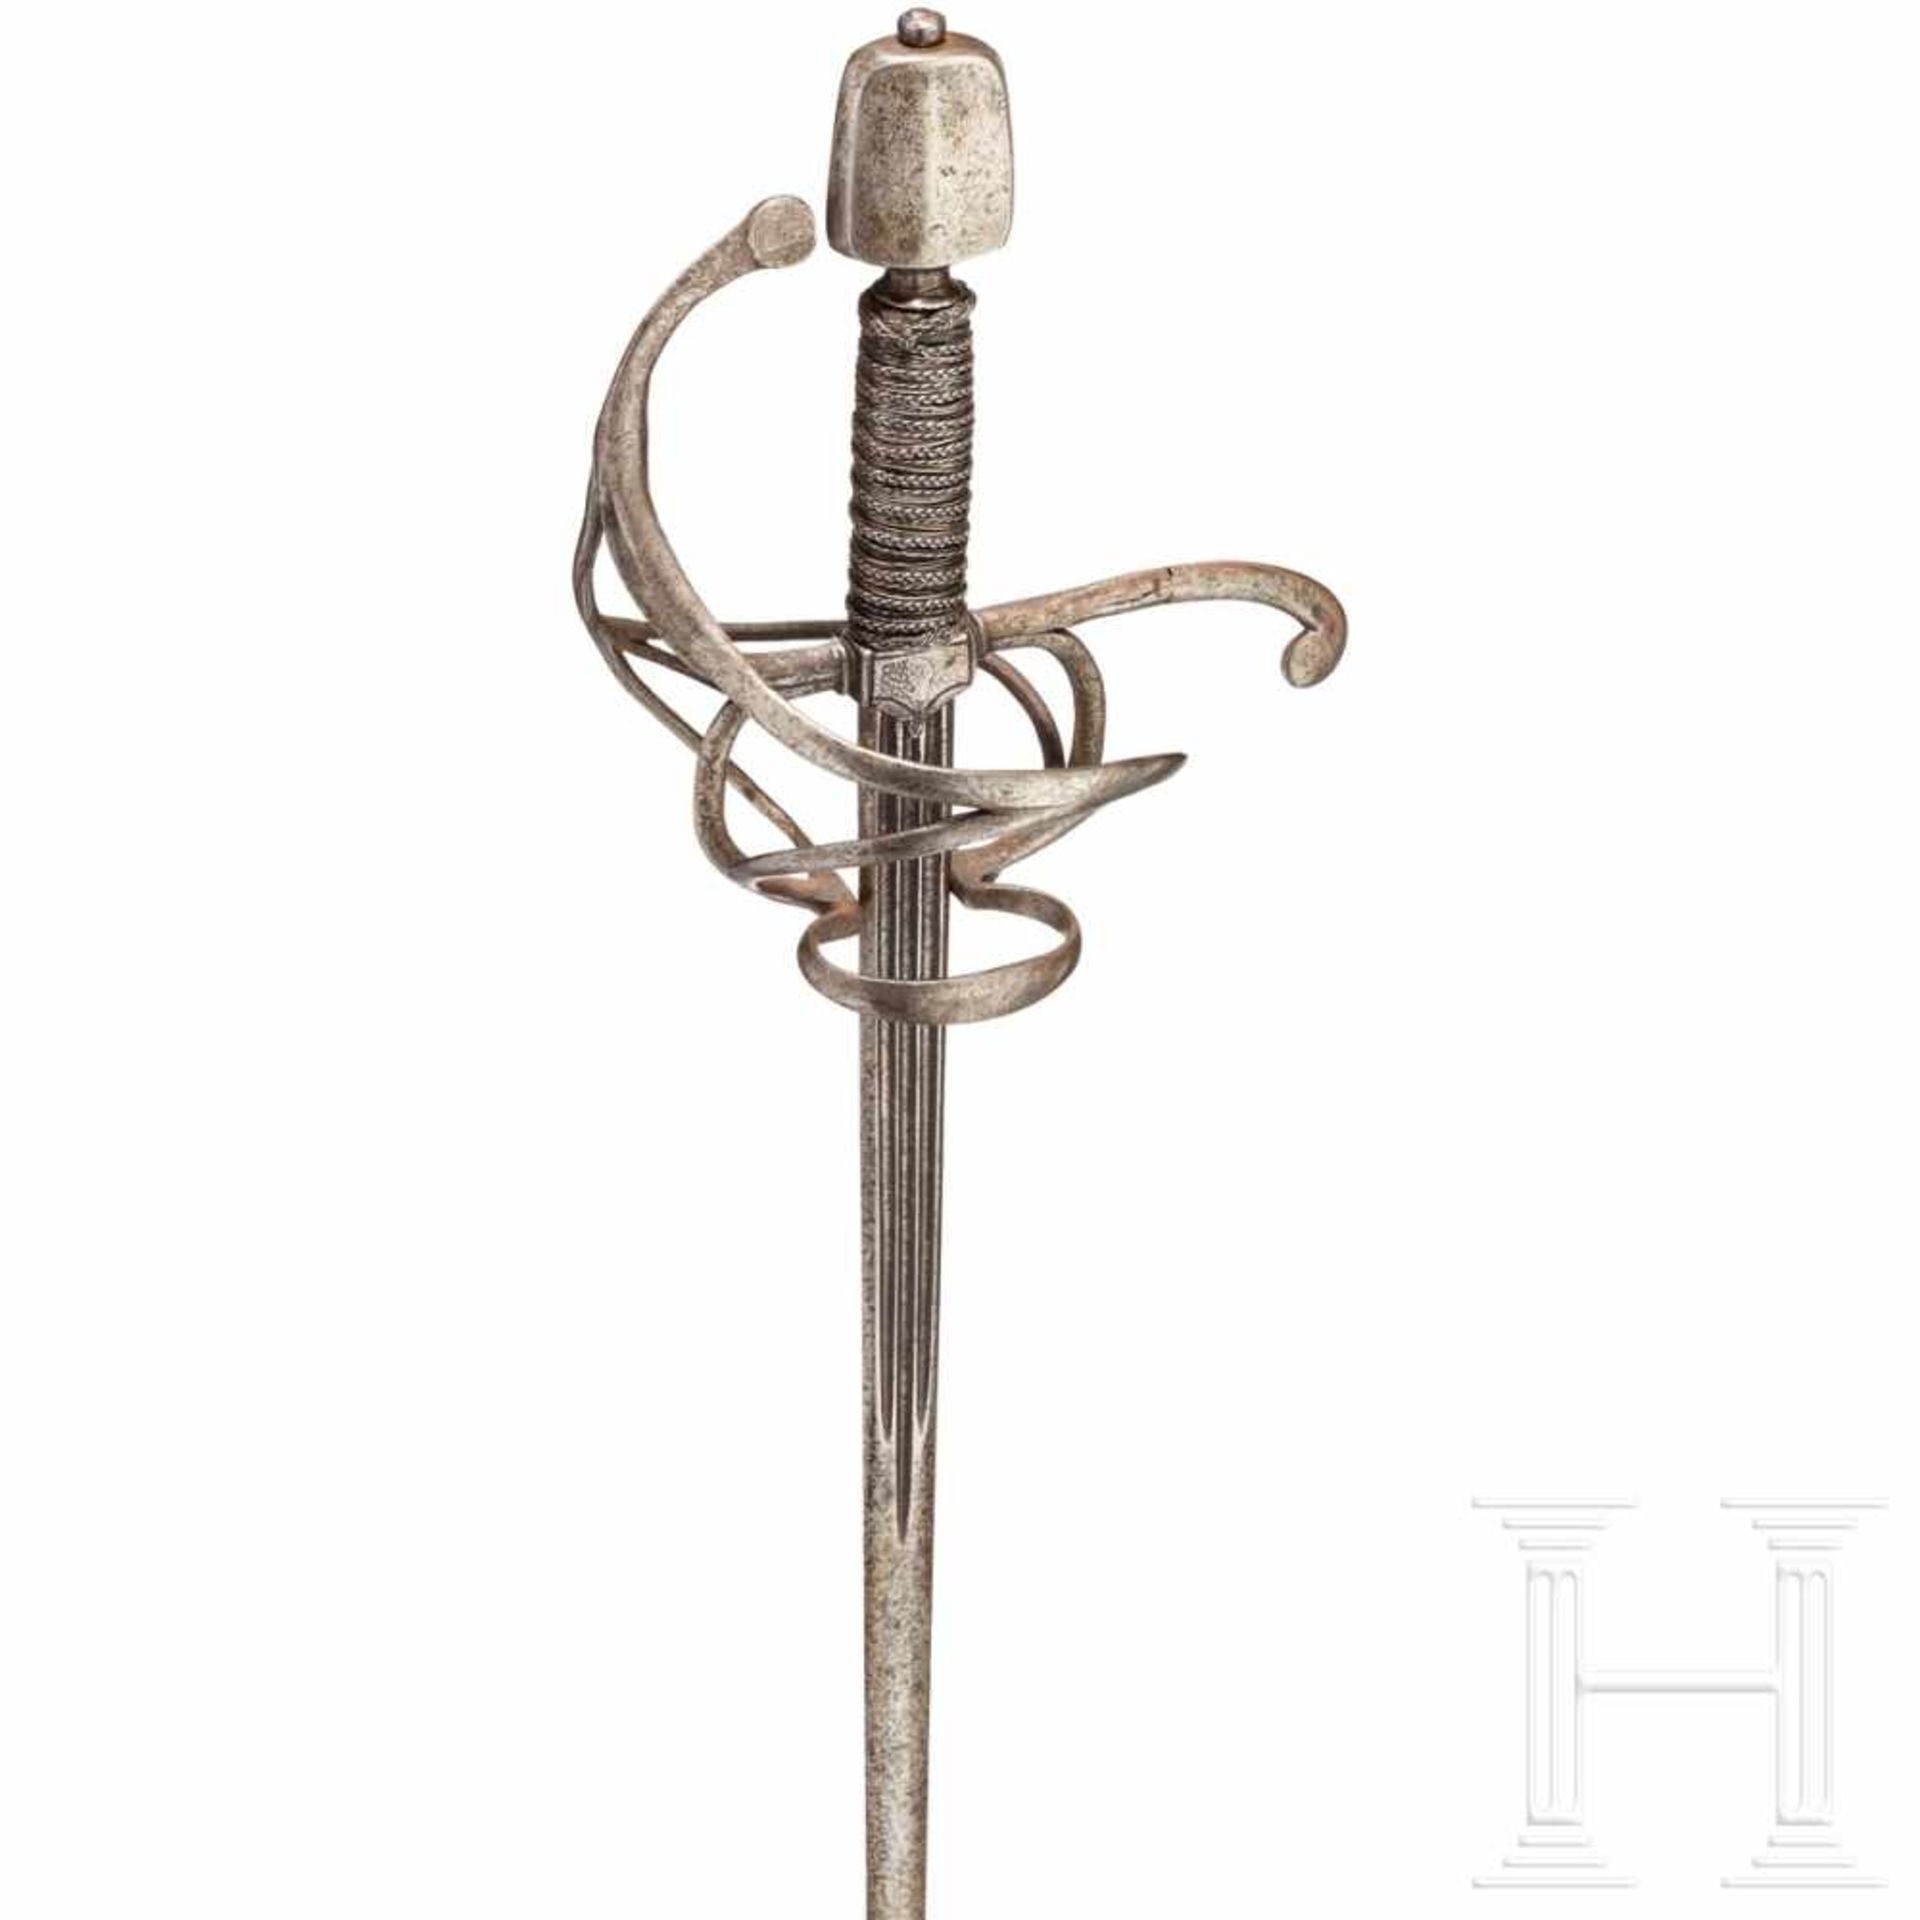 A German military rapier, circa 1600Double-edged thrusting blade of lenticular cross-section with - Bild 4 aus 4